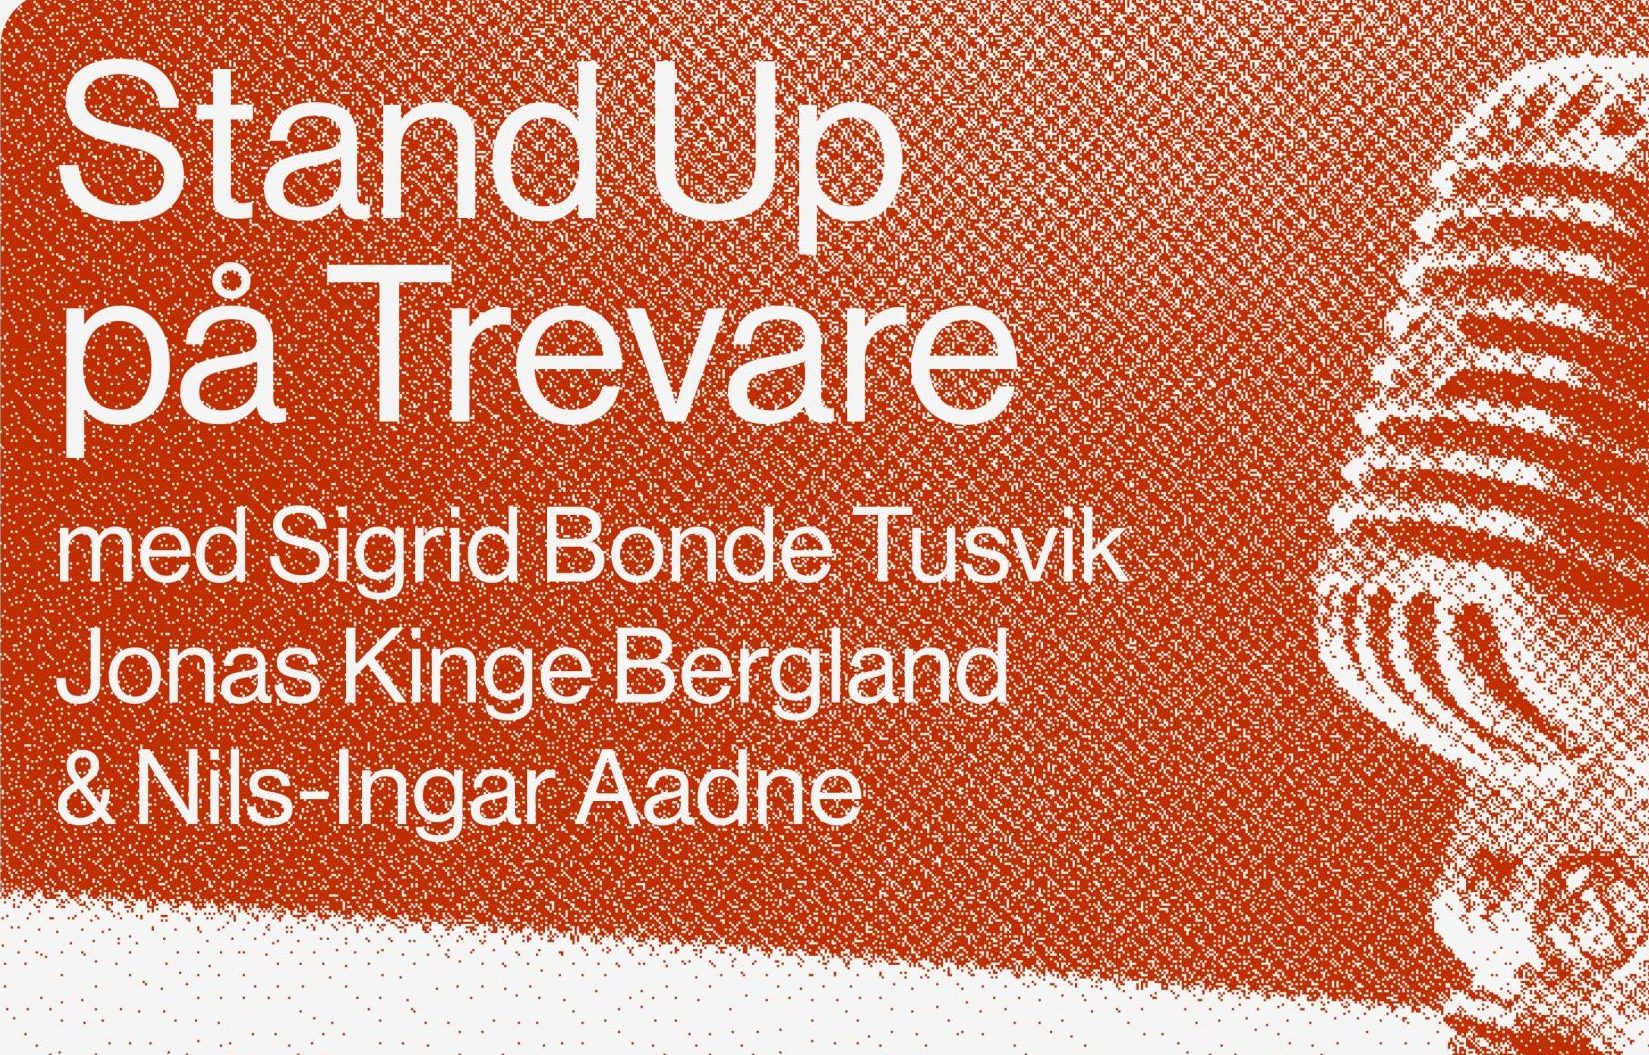 Stand up Trevare